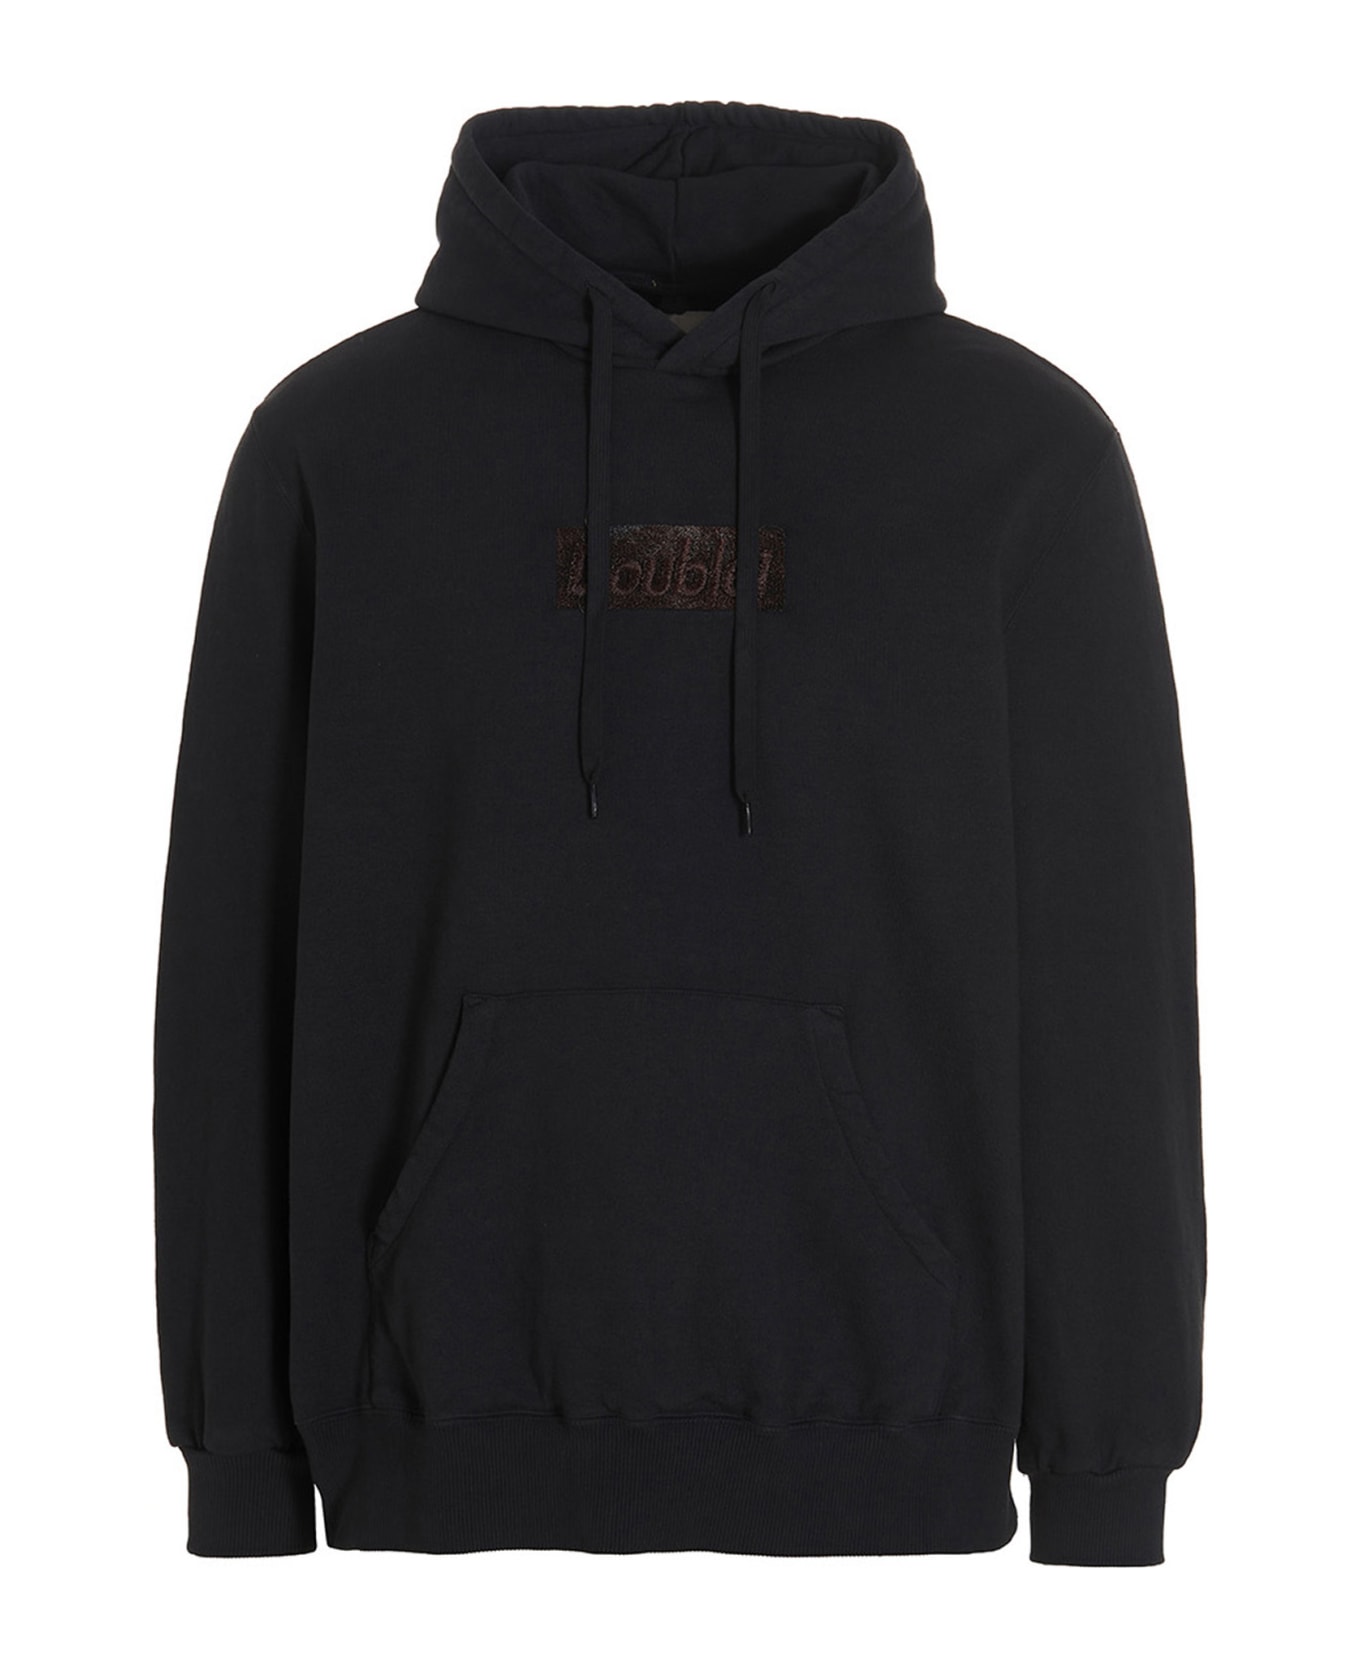 doublet 'polyurethane Embroidery' Hoodie - Black  